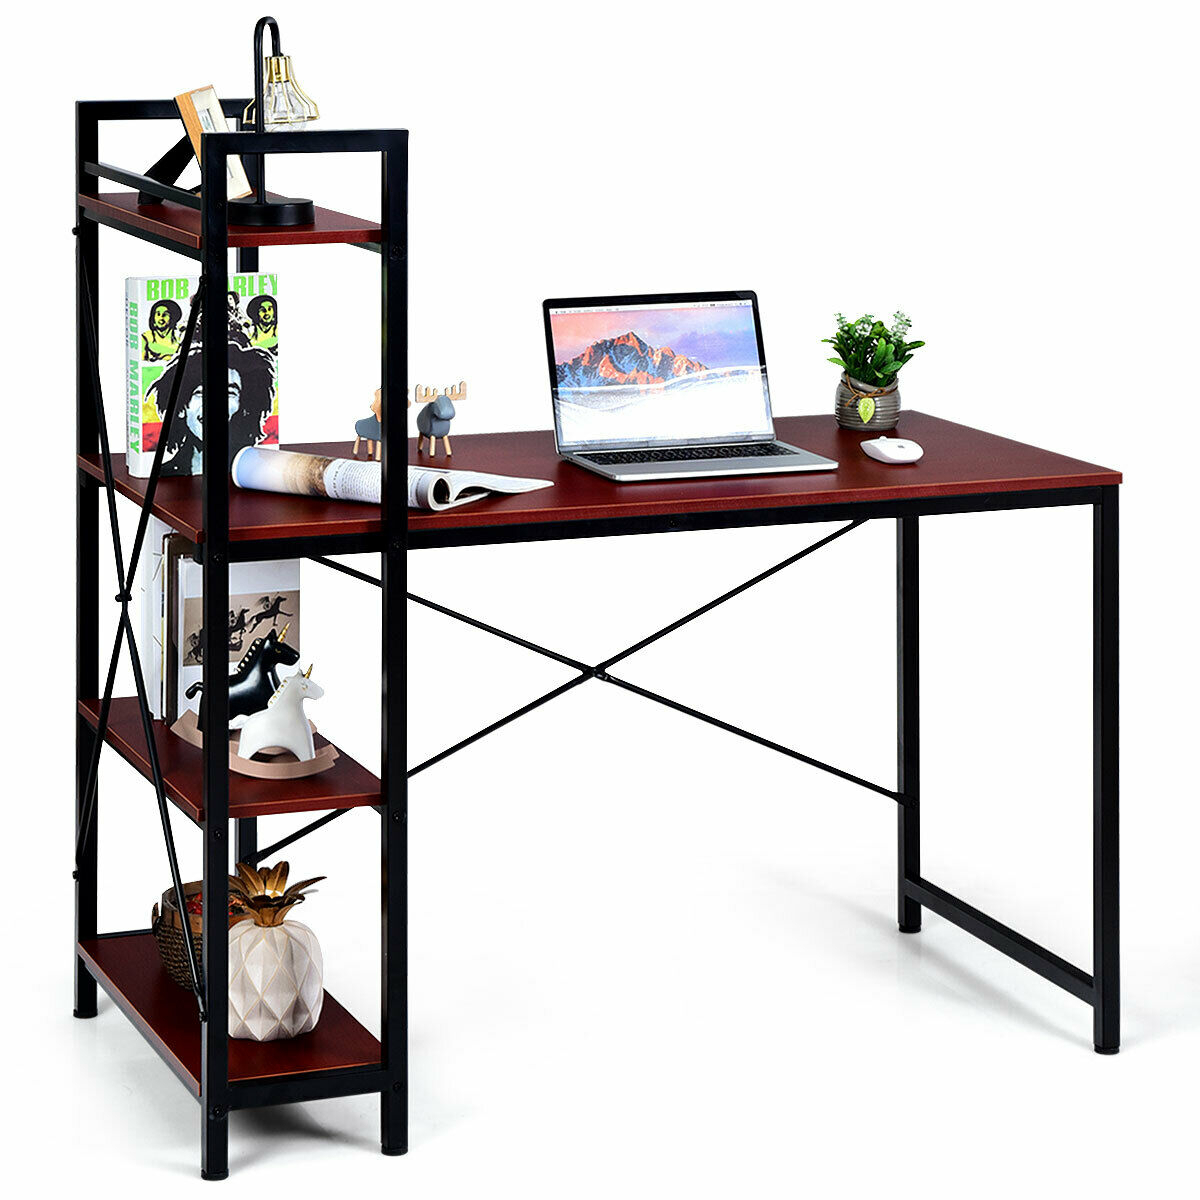 47.5'' Computer Desk Writing Desk Study Table Workstation With 4-Tier Shelves